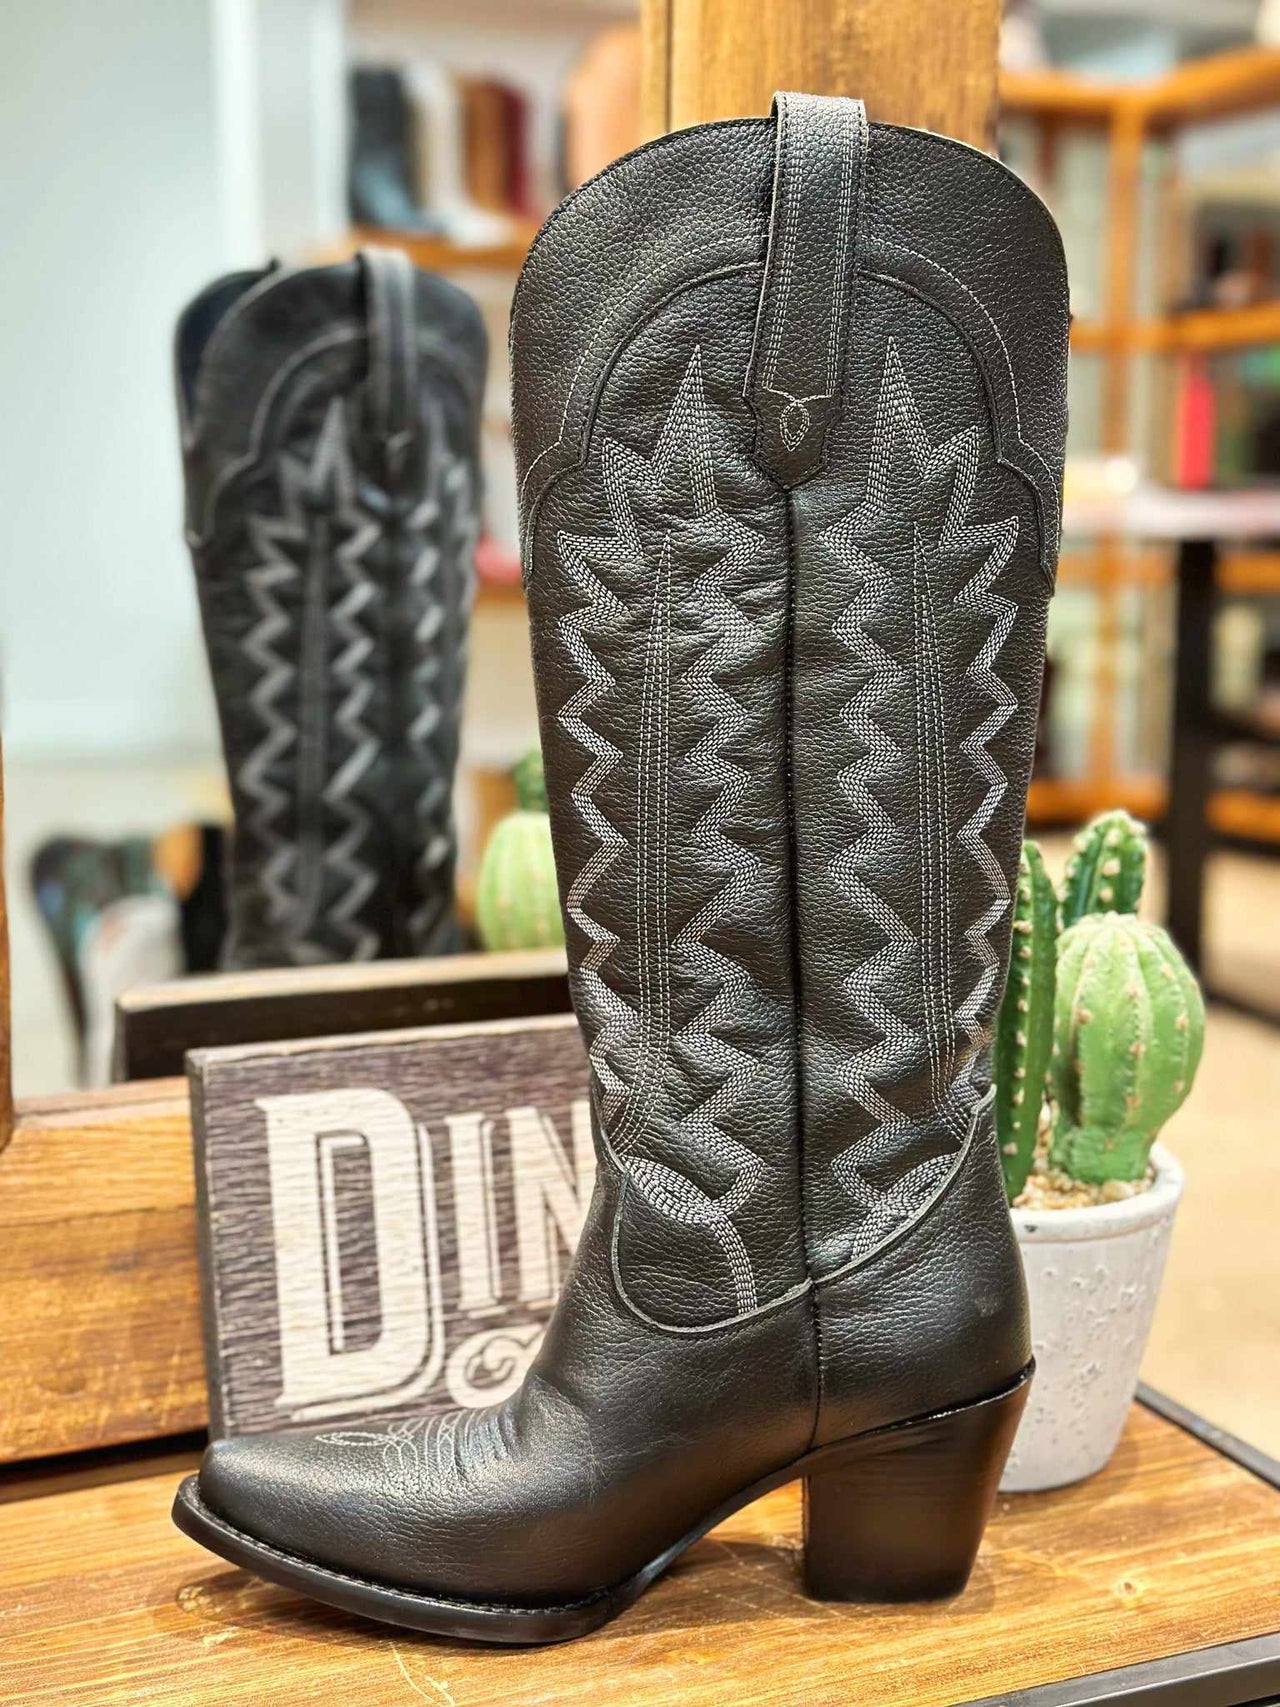 High Cotton Boot by Dingo from Dan Post - Black